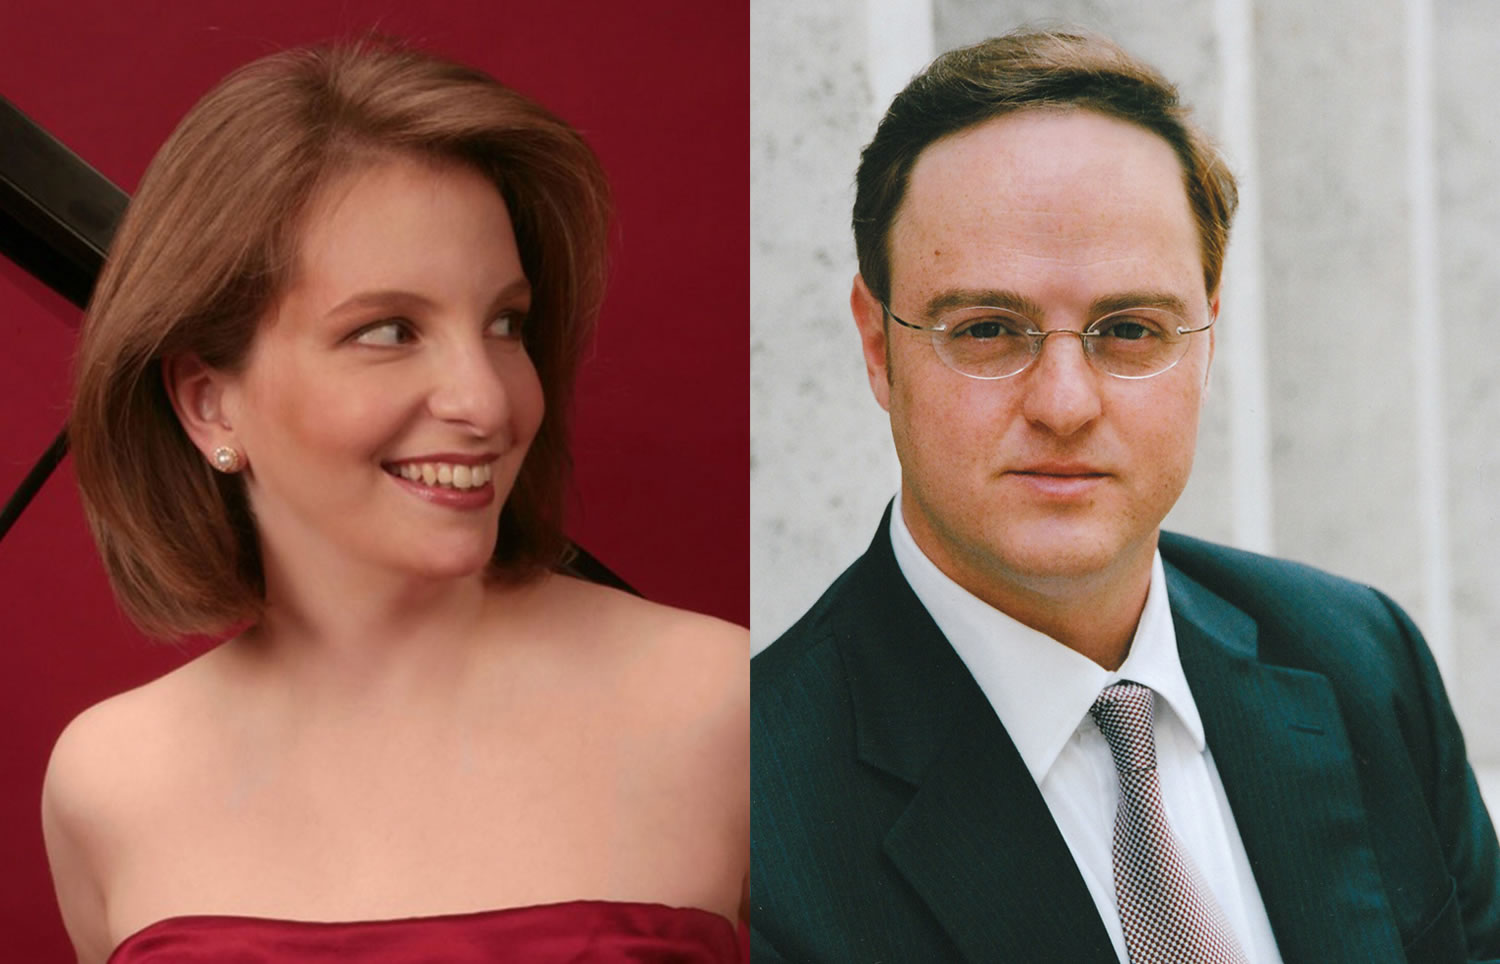 Orli Shaham, left, and Igal Kesselman will perform with the Vancouver Symphony on May 31 and June 1.